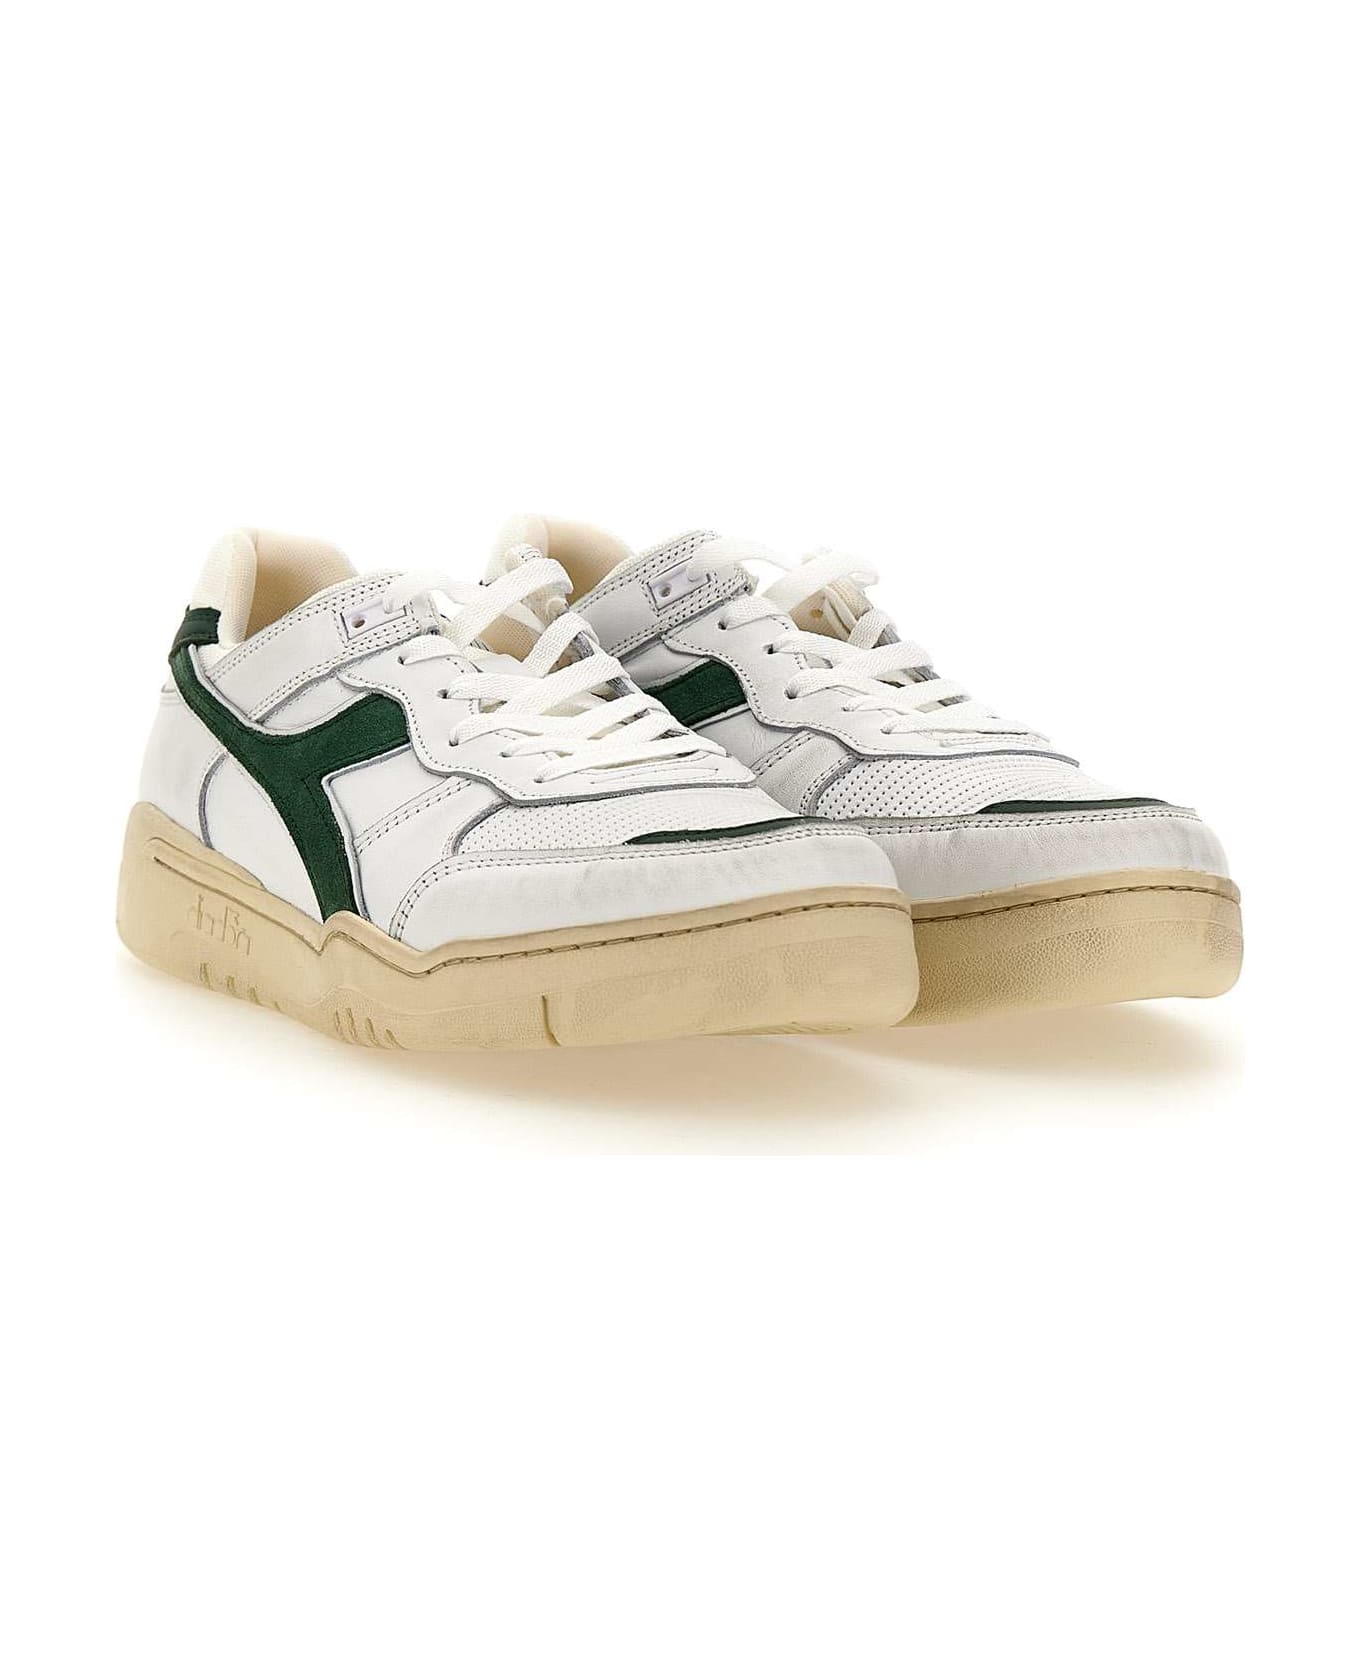 Diadora "b.560 Used" Leather Sneakers - WHITE スニーカー